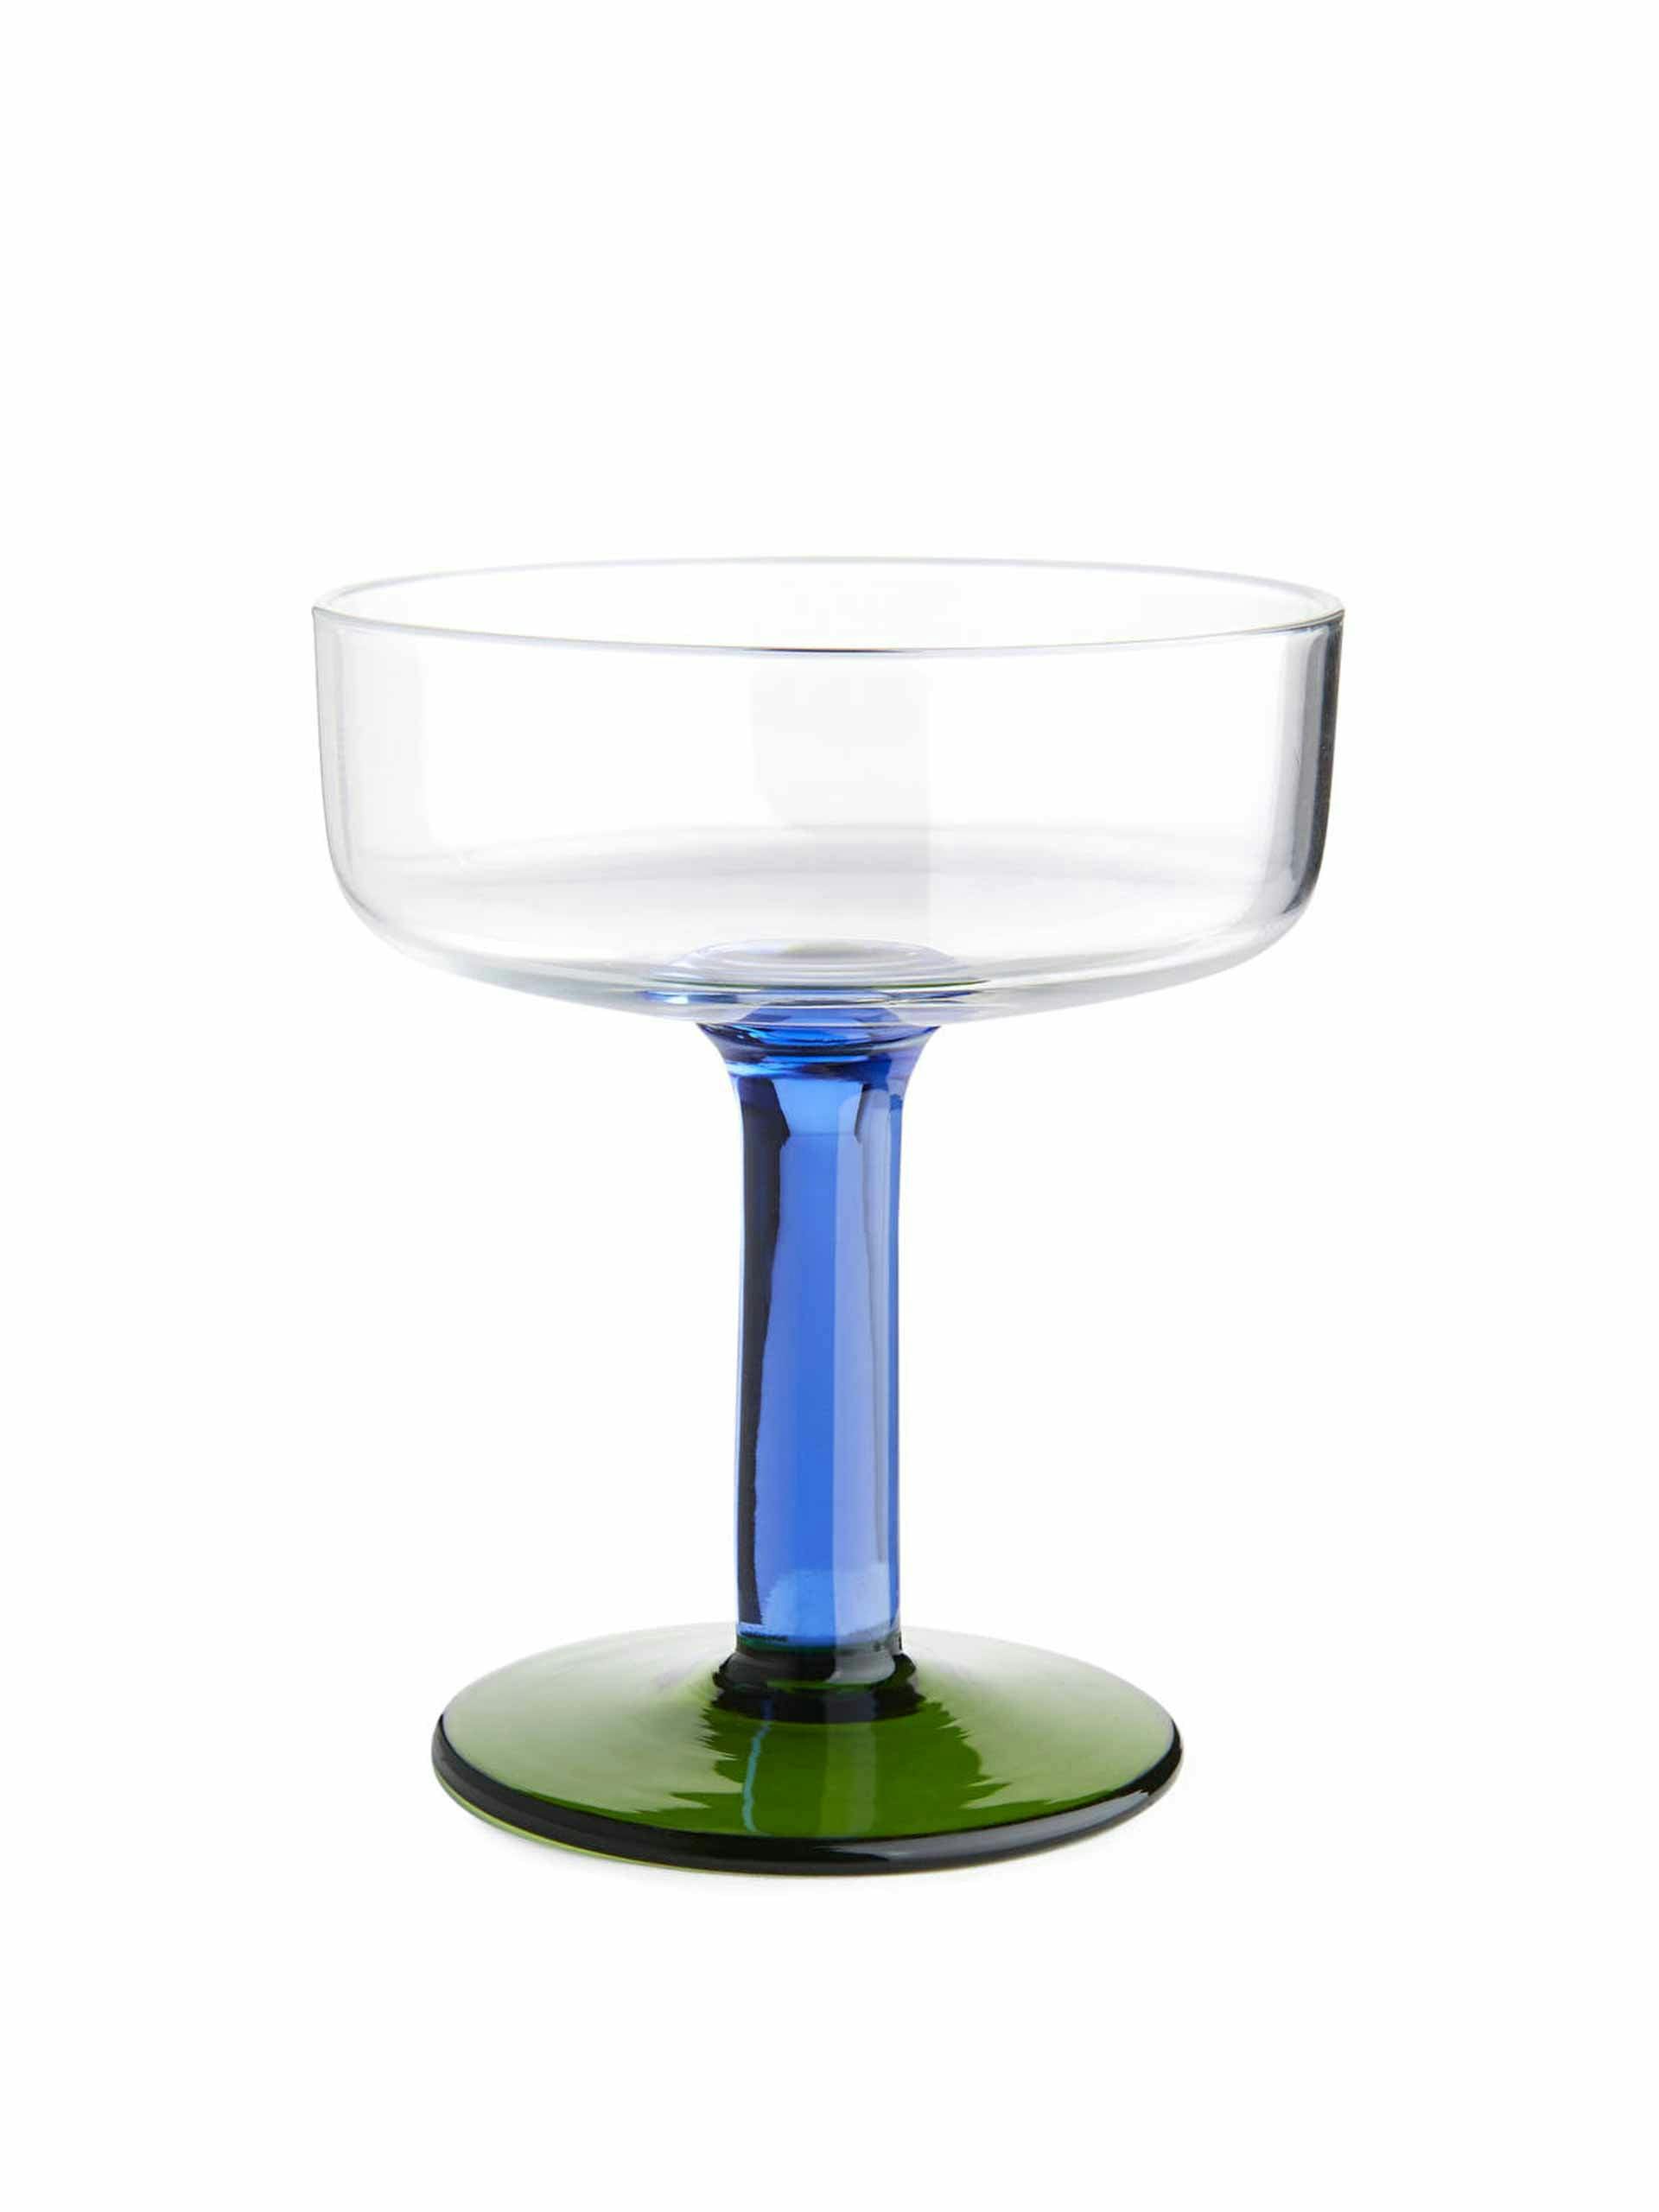 Coupe glasses (set of 2)